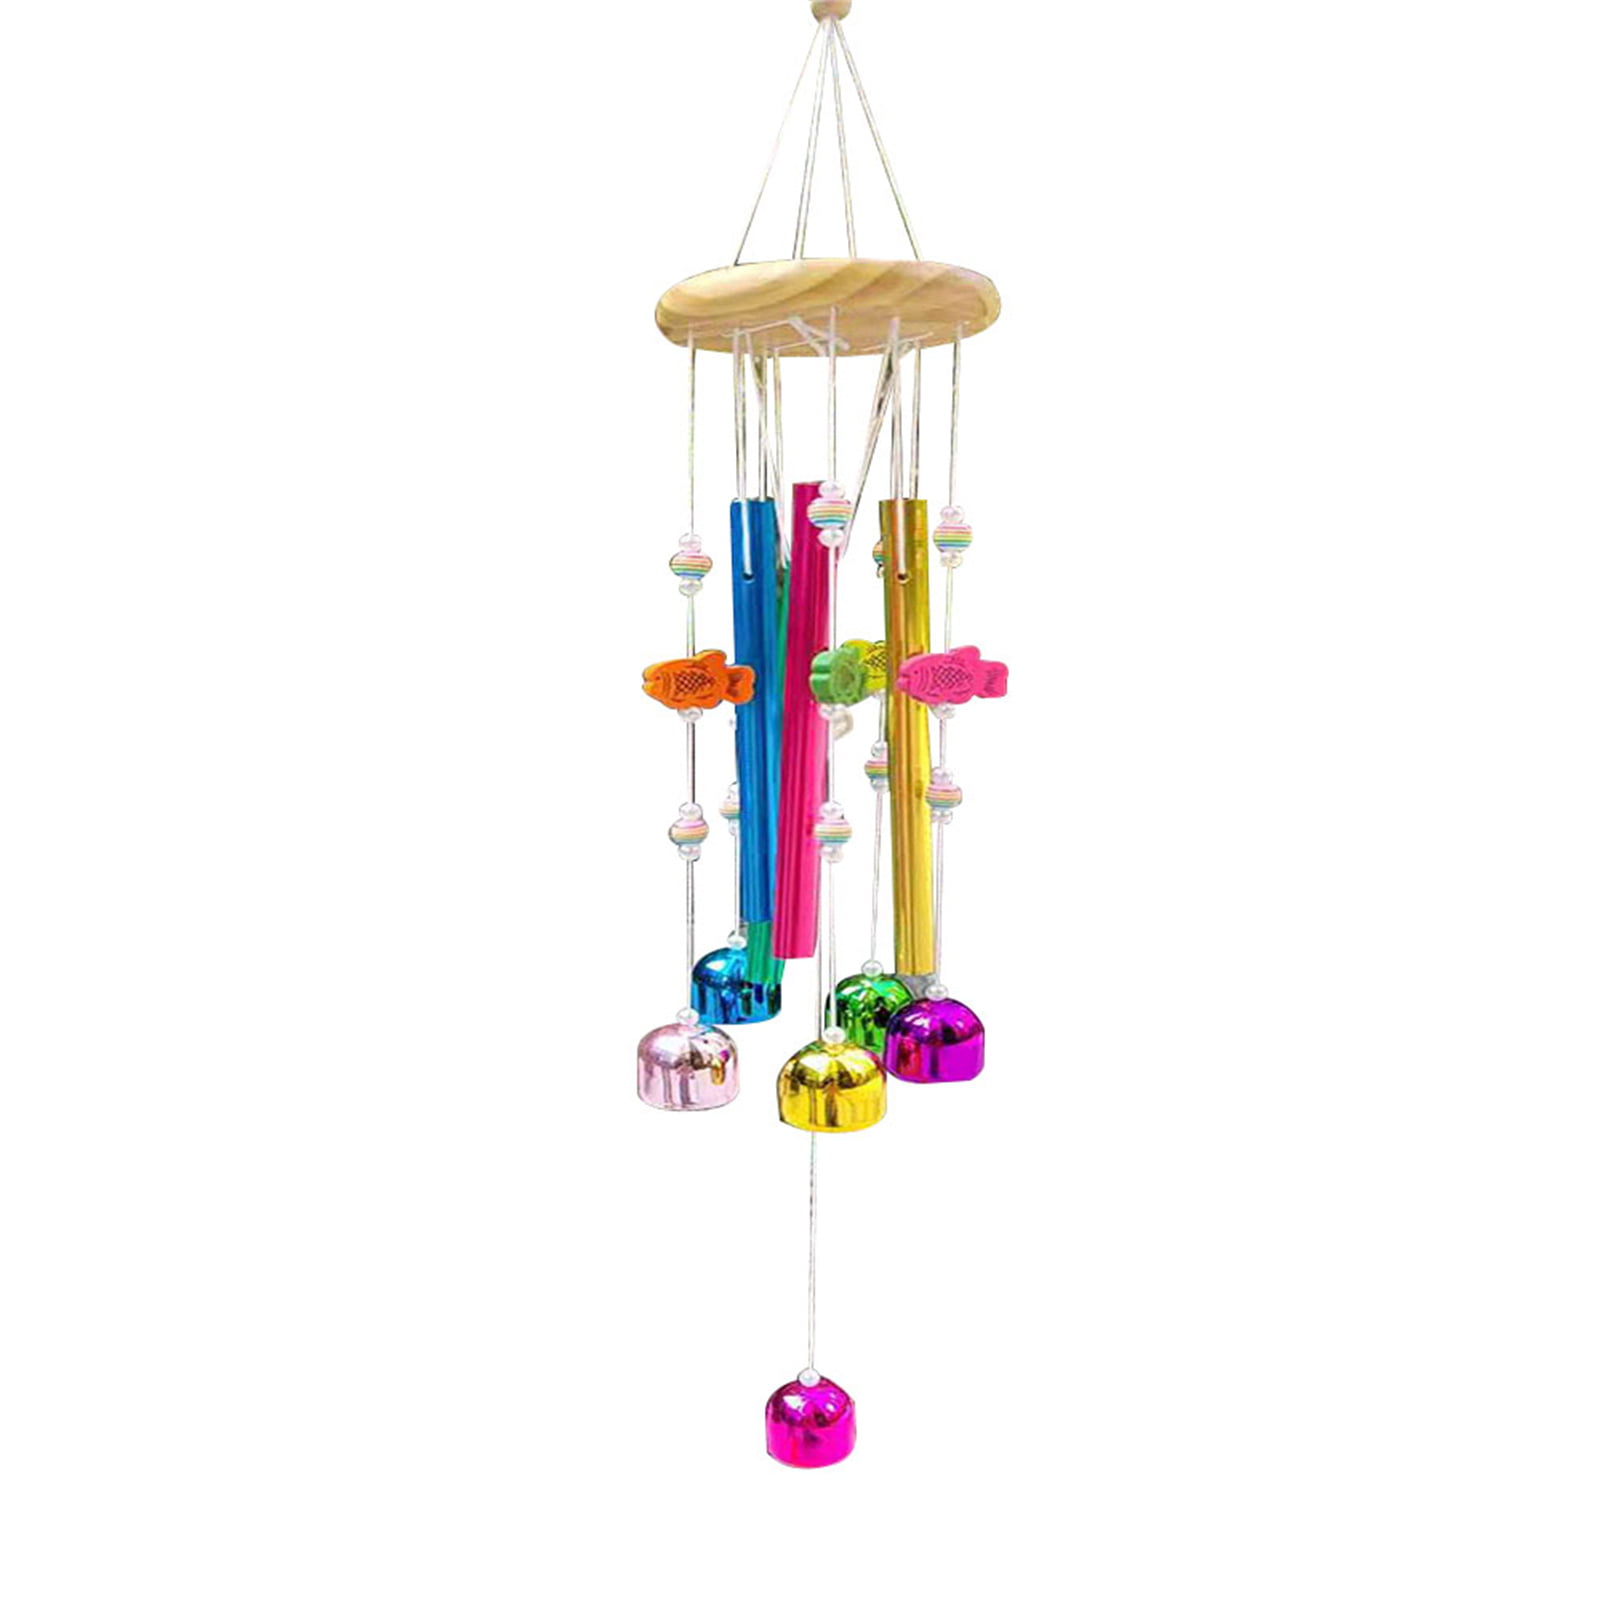 Outdoor Garden Wind Chime Alloy Iron Piece Hanging Ornament Window Pendant